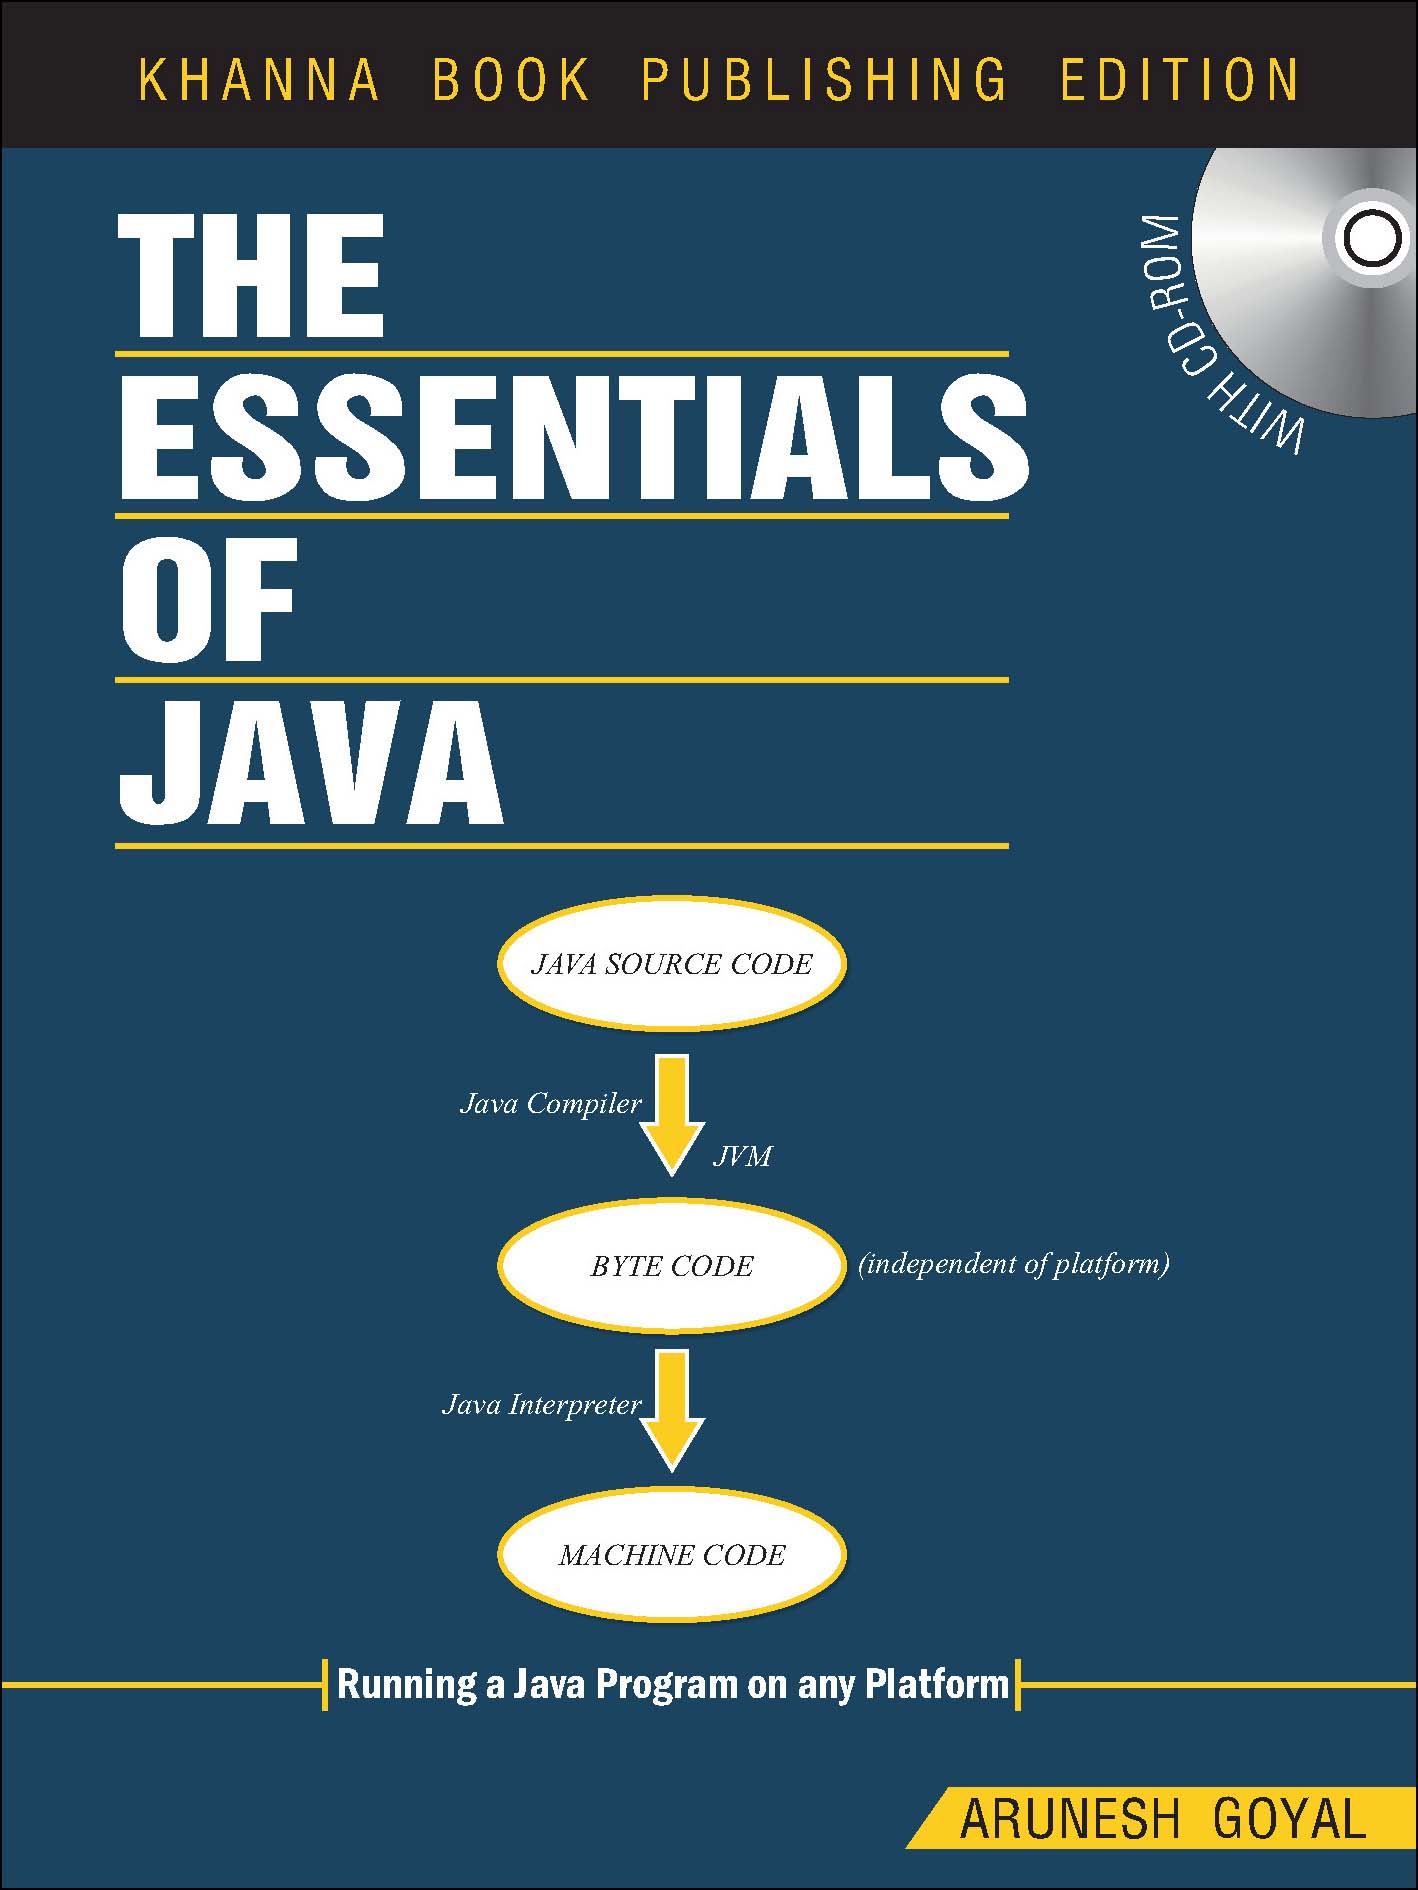 The Essentials of Java (w/CD)